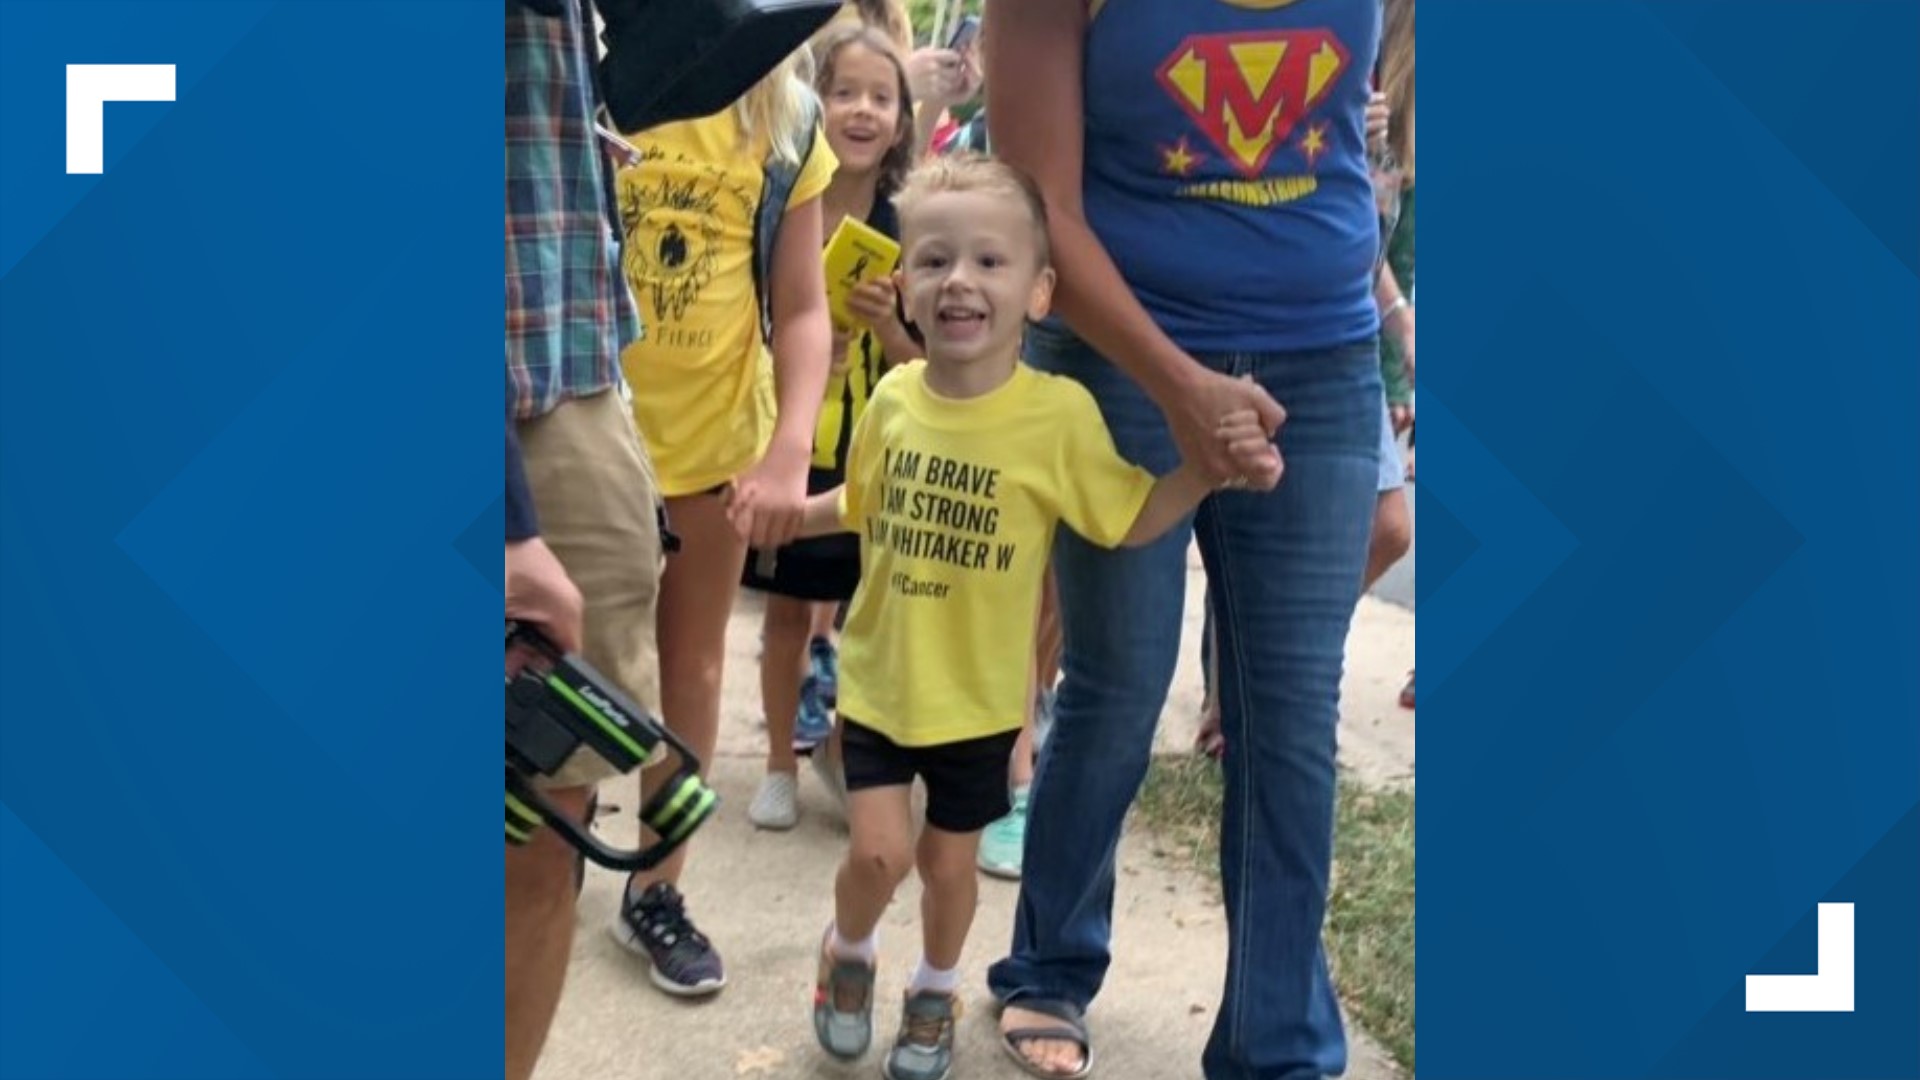 Whitaker Weinburger was diagnosed with neuroblastoma at a year old. For his birthday, hundreds of strangers surprised him, bringing his love for yellow cars to life